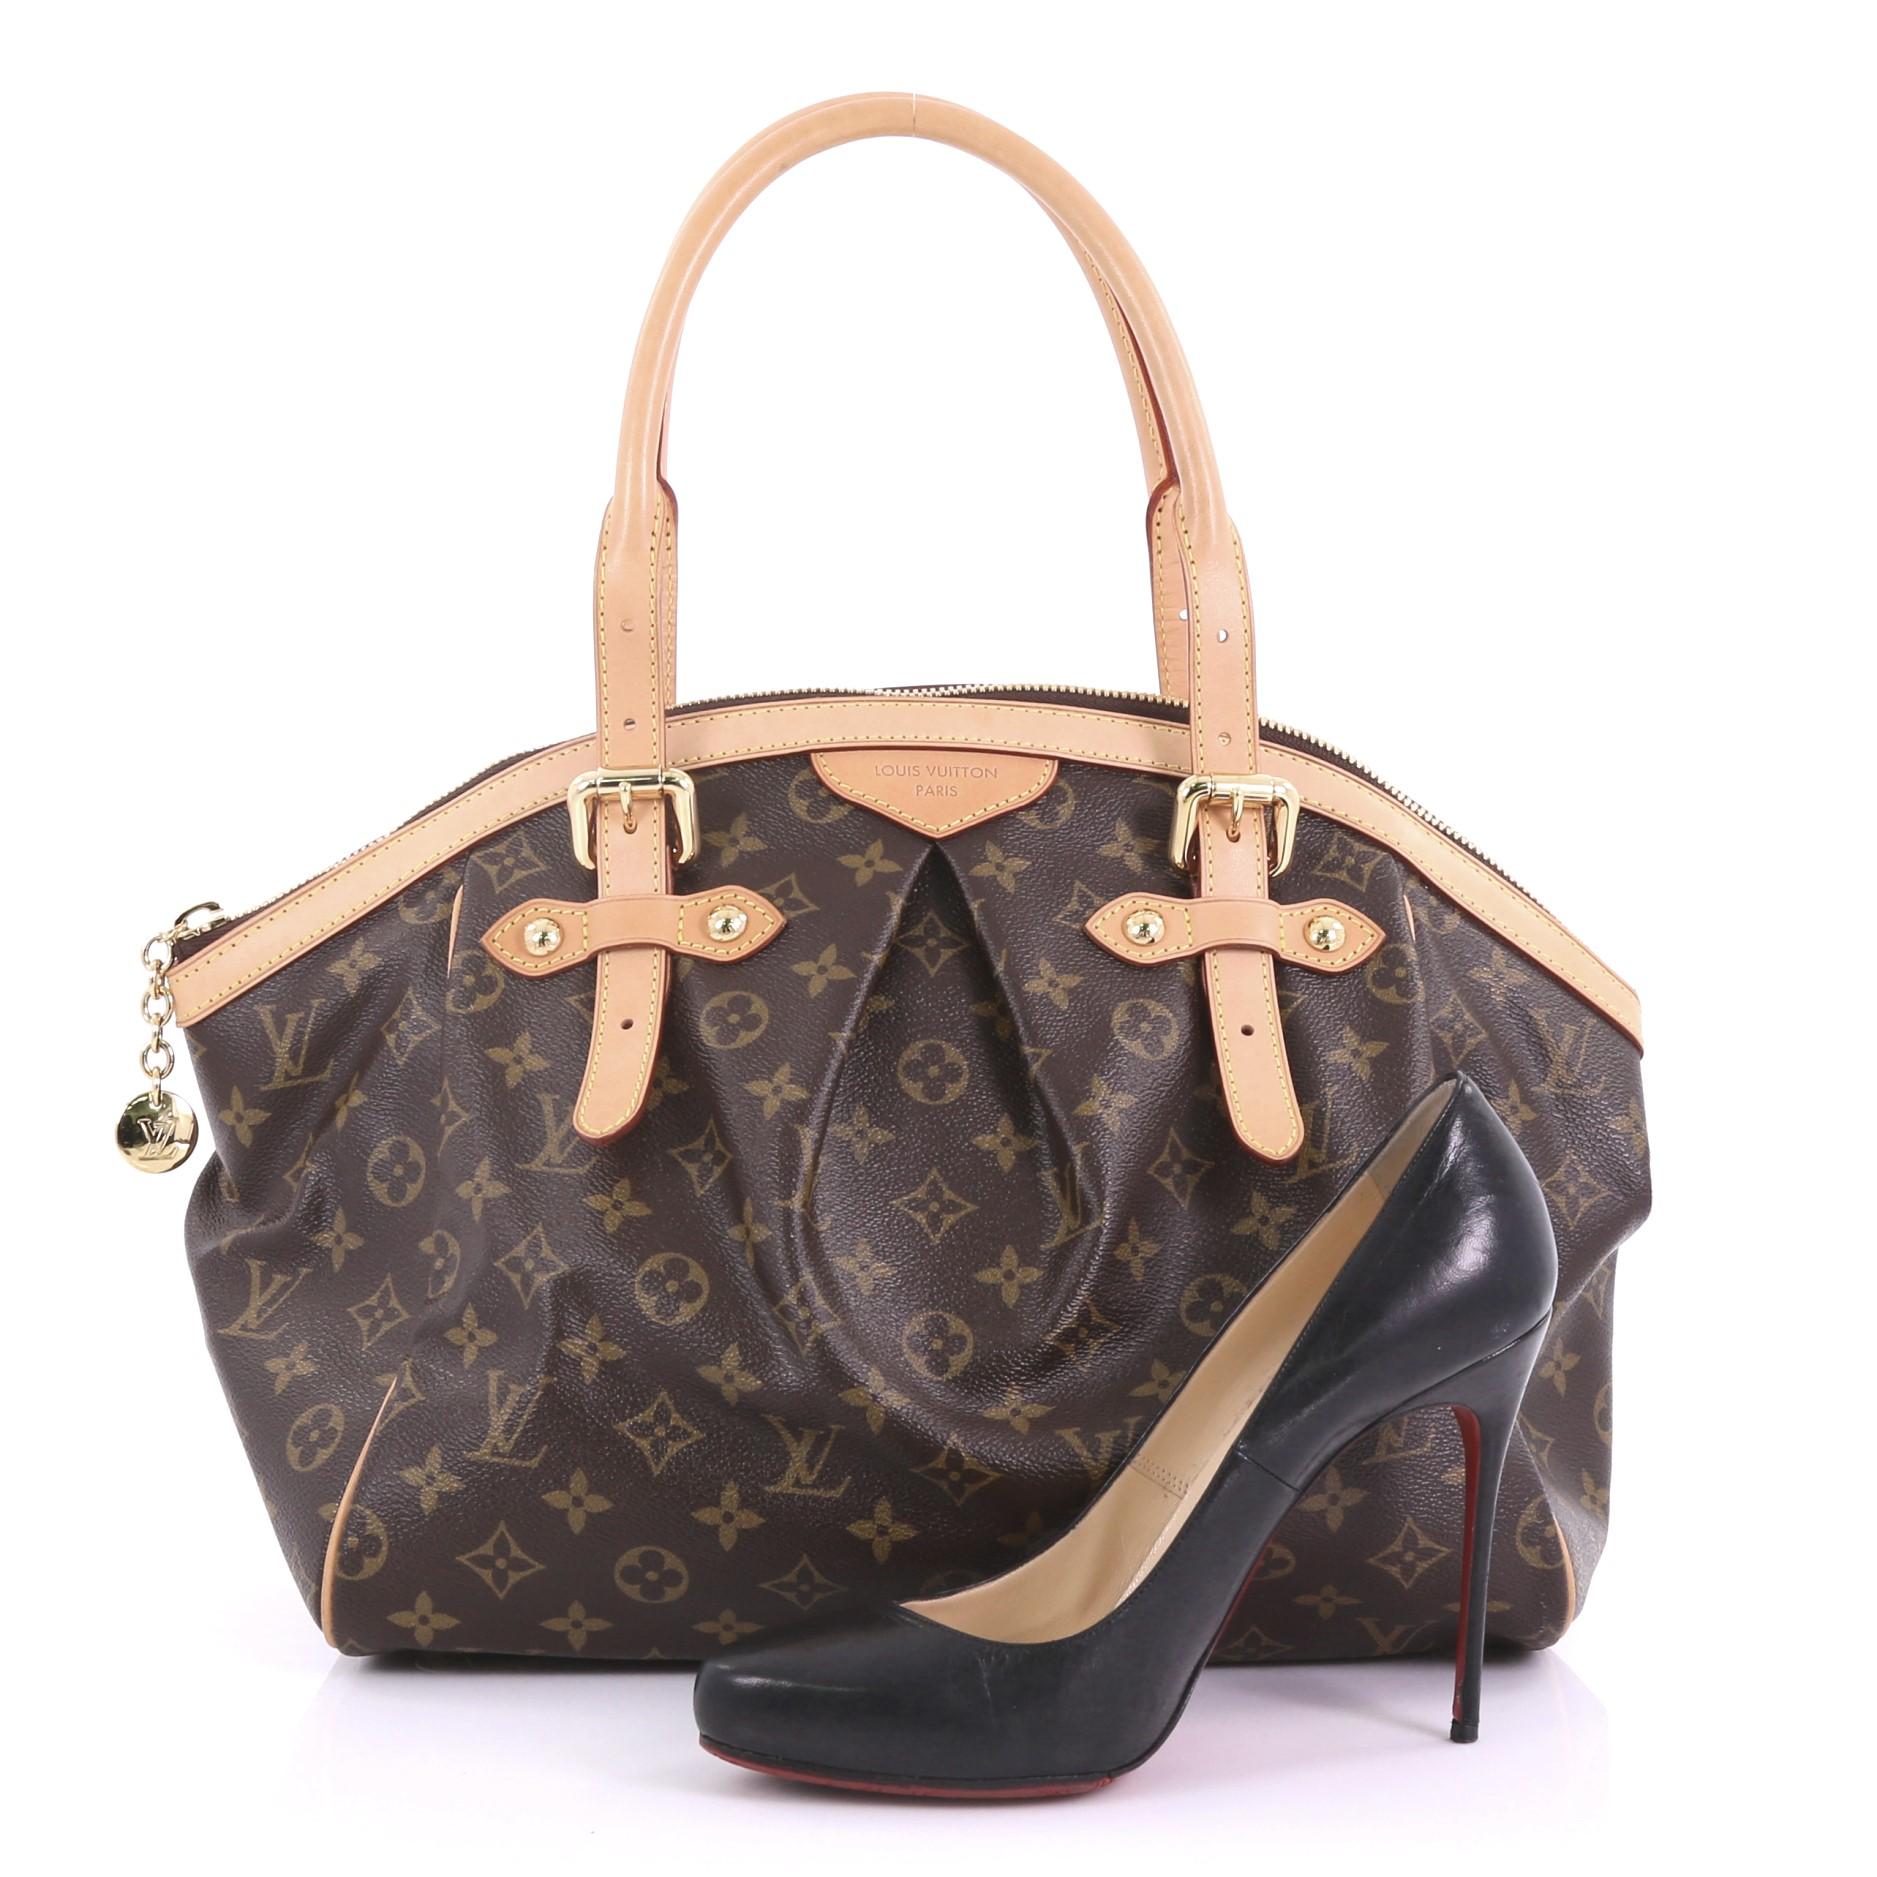 This Louis Vuitton Tivoli Handbag Monogram Canvas GM, crafted from brown monogram coated canvas, features dual rolled handles, subtle pleats in the middle, and gold-tone hardware. Its top zip closure opens to a brown fabric interior with slip